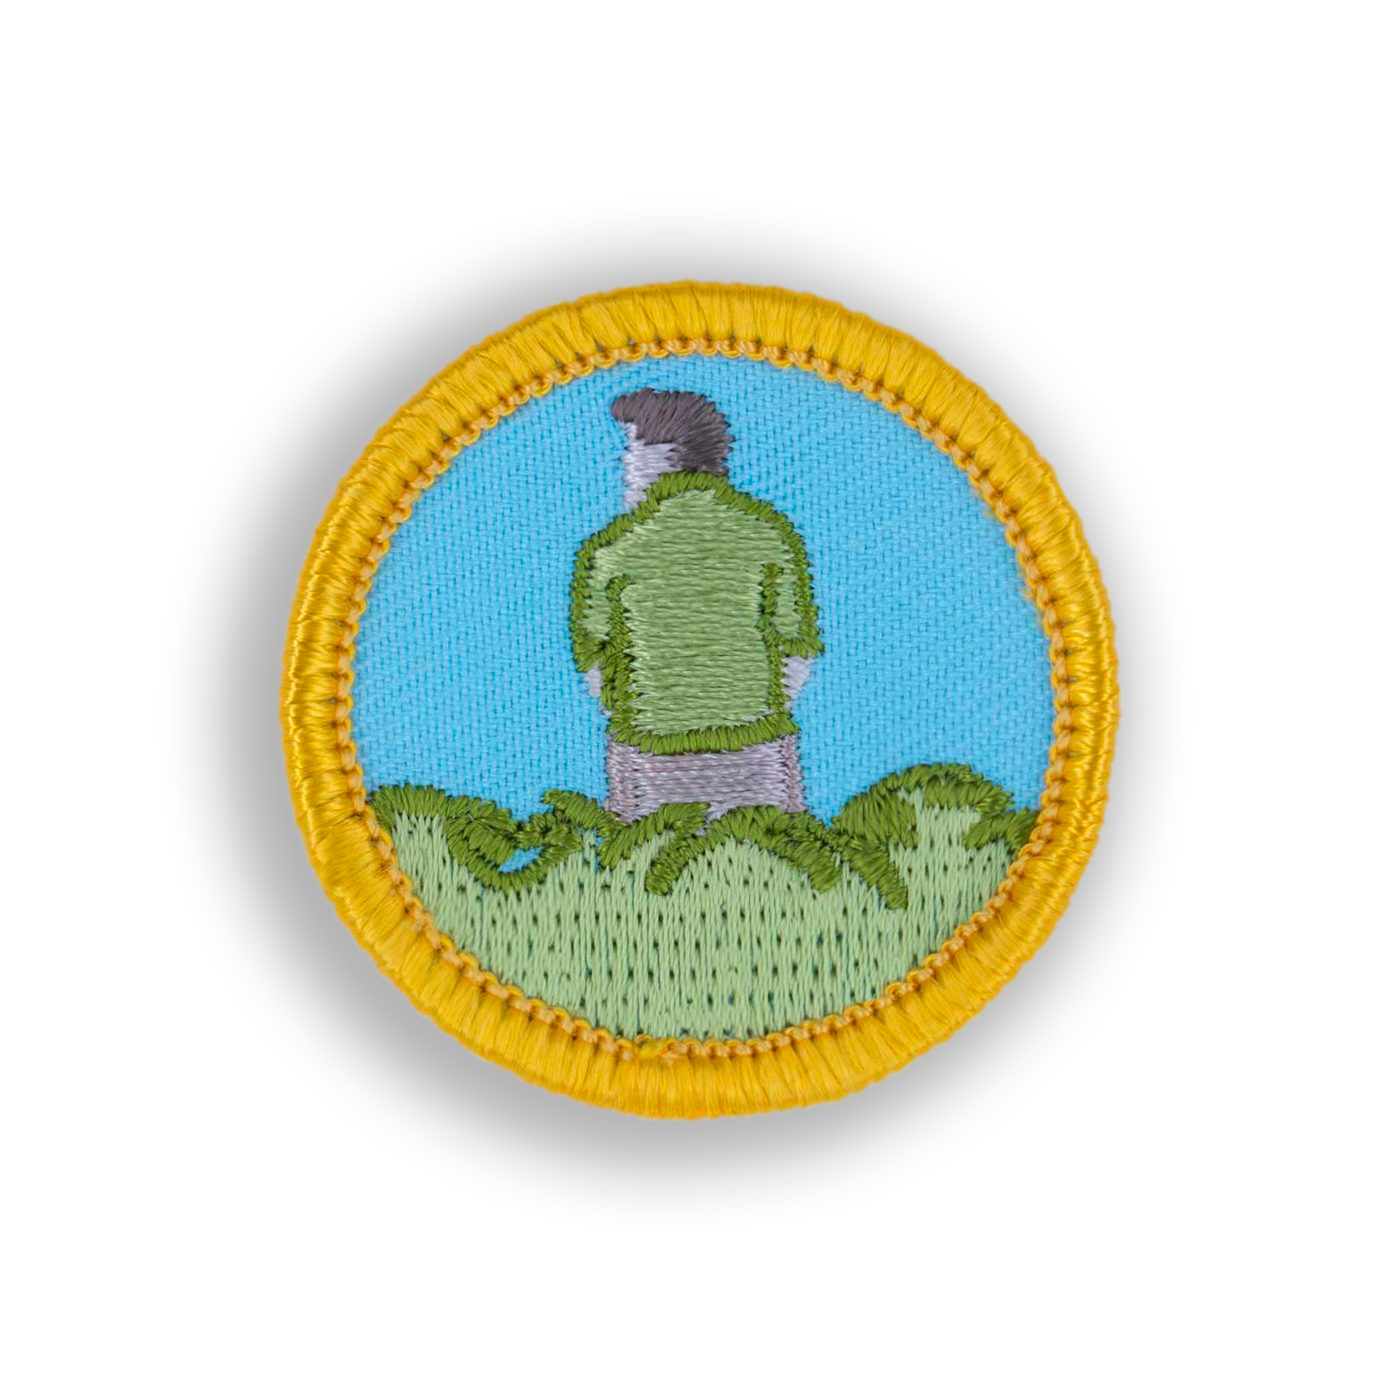 In The Bushes Patch | Demerit Wear - Fake Merit Badges